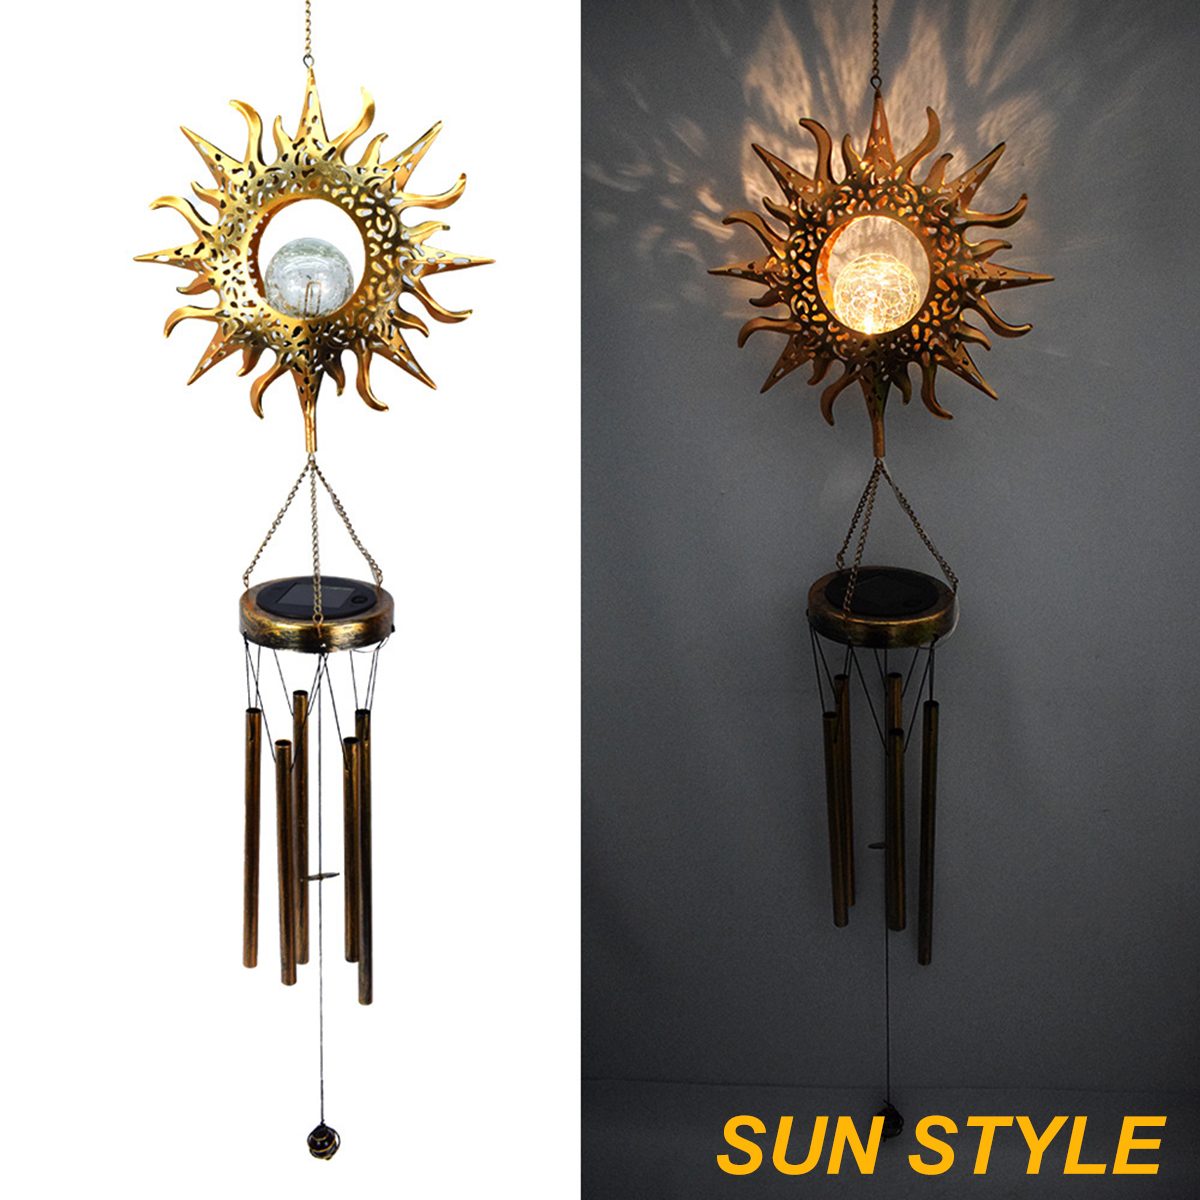 Wind-Bell-LED-Solar-Powered-Lamp-Home-Outdoor-Indoor-Decor-Gift-Moon-Sun-Star-1851218-7